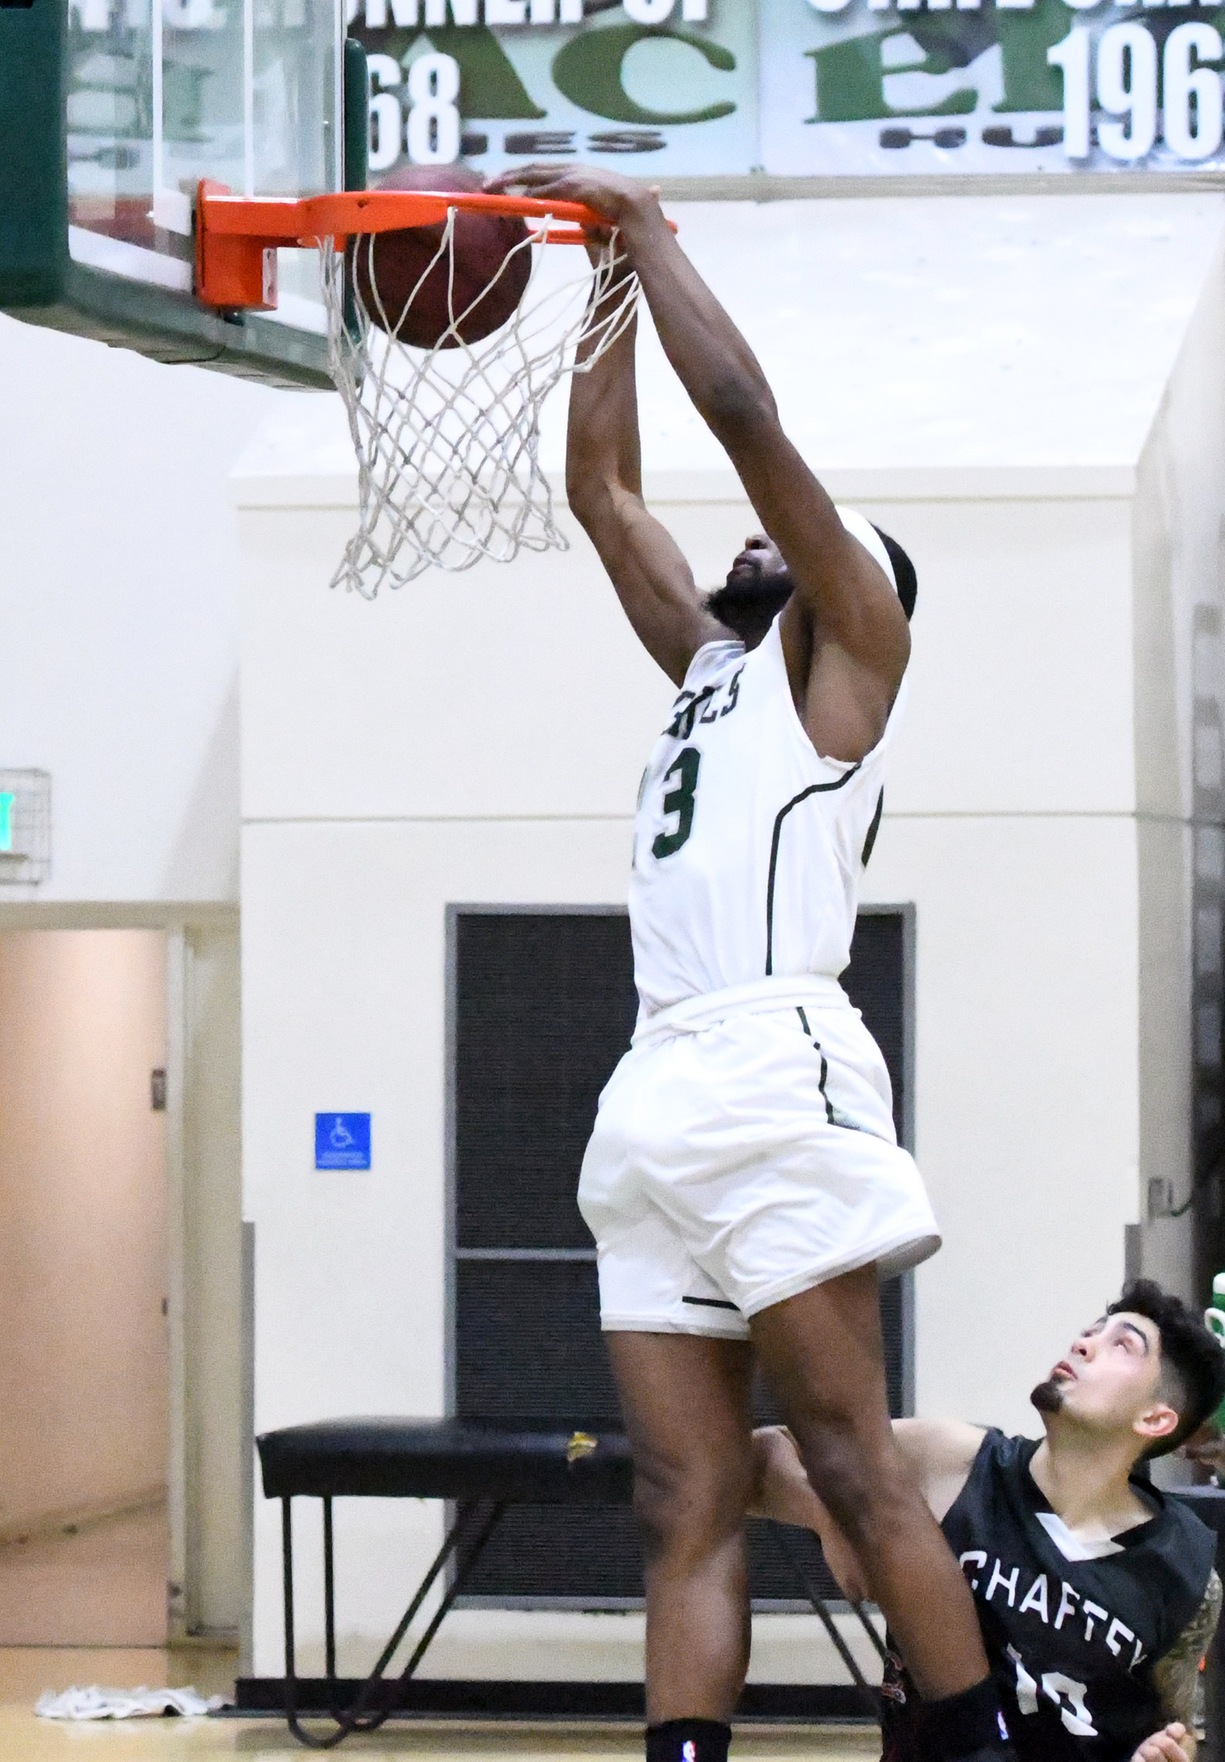 East Los Angeles College sophomore forward Roderick Williams slams his second dunk of the night in an 86-45 win over Chaffey College. (Photo by DeeDee Jackson)